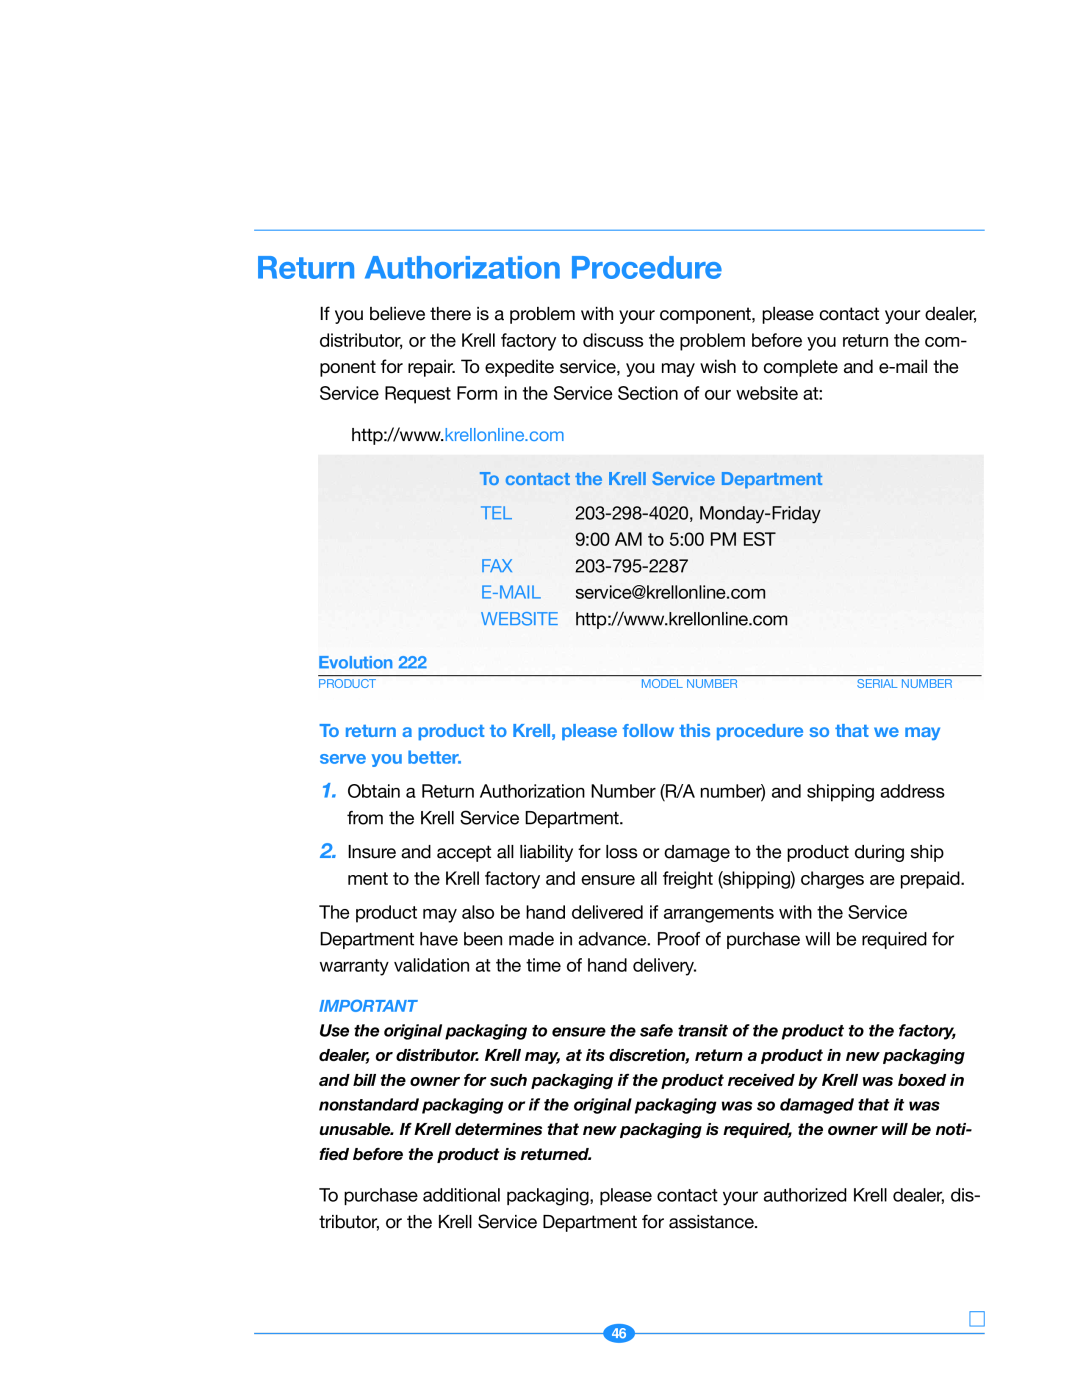 Krell Industries 222 manual Return Authorization Procedure, To contact the Krell Service Department, E-Mail, Website 